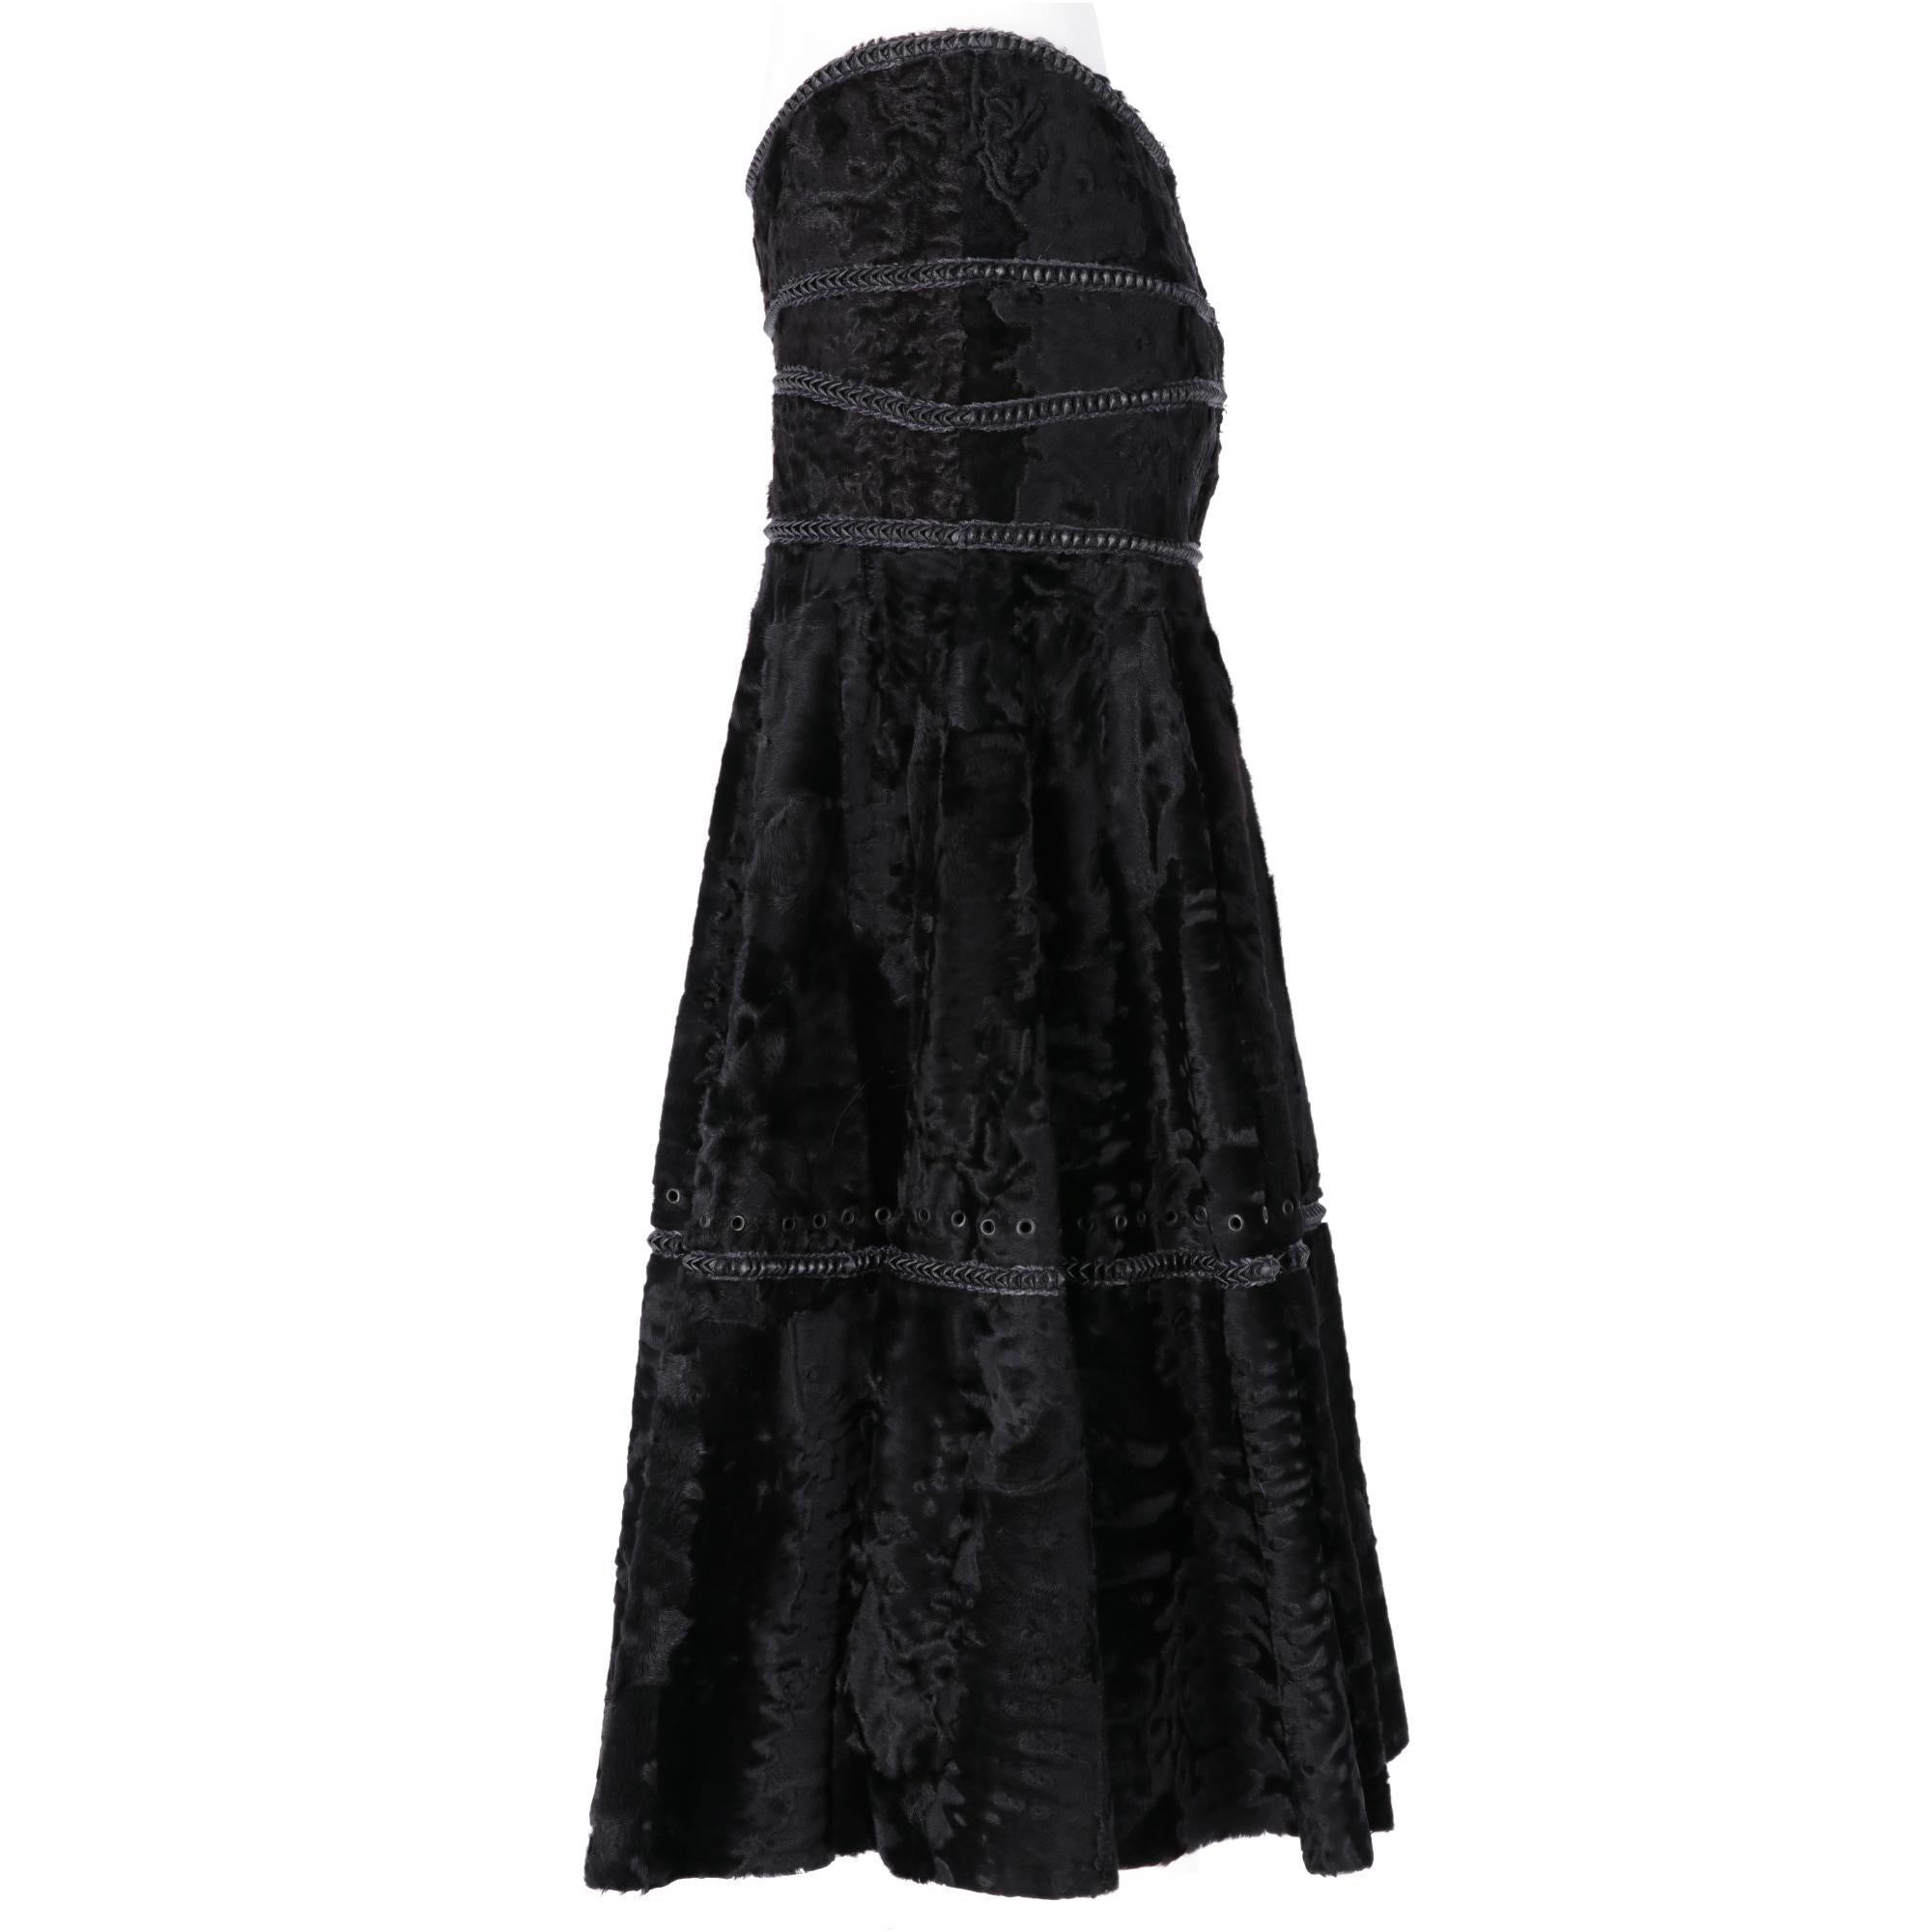 Gianfranco Ferrè long high-waisted skirt, tight to the pelvis and flared on the bottom, in black astrakhan fur, with decorative inserts in black leather and metal rivets, on the front there is a black metal logoed plate, closure on the back with zip